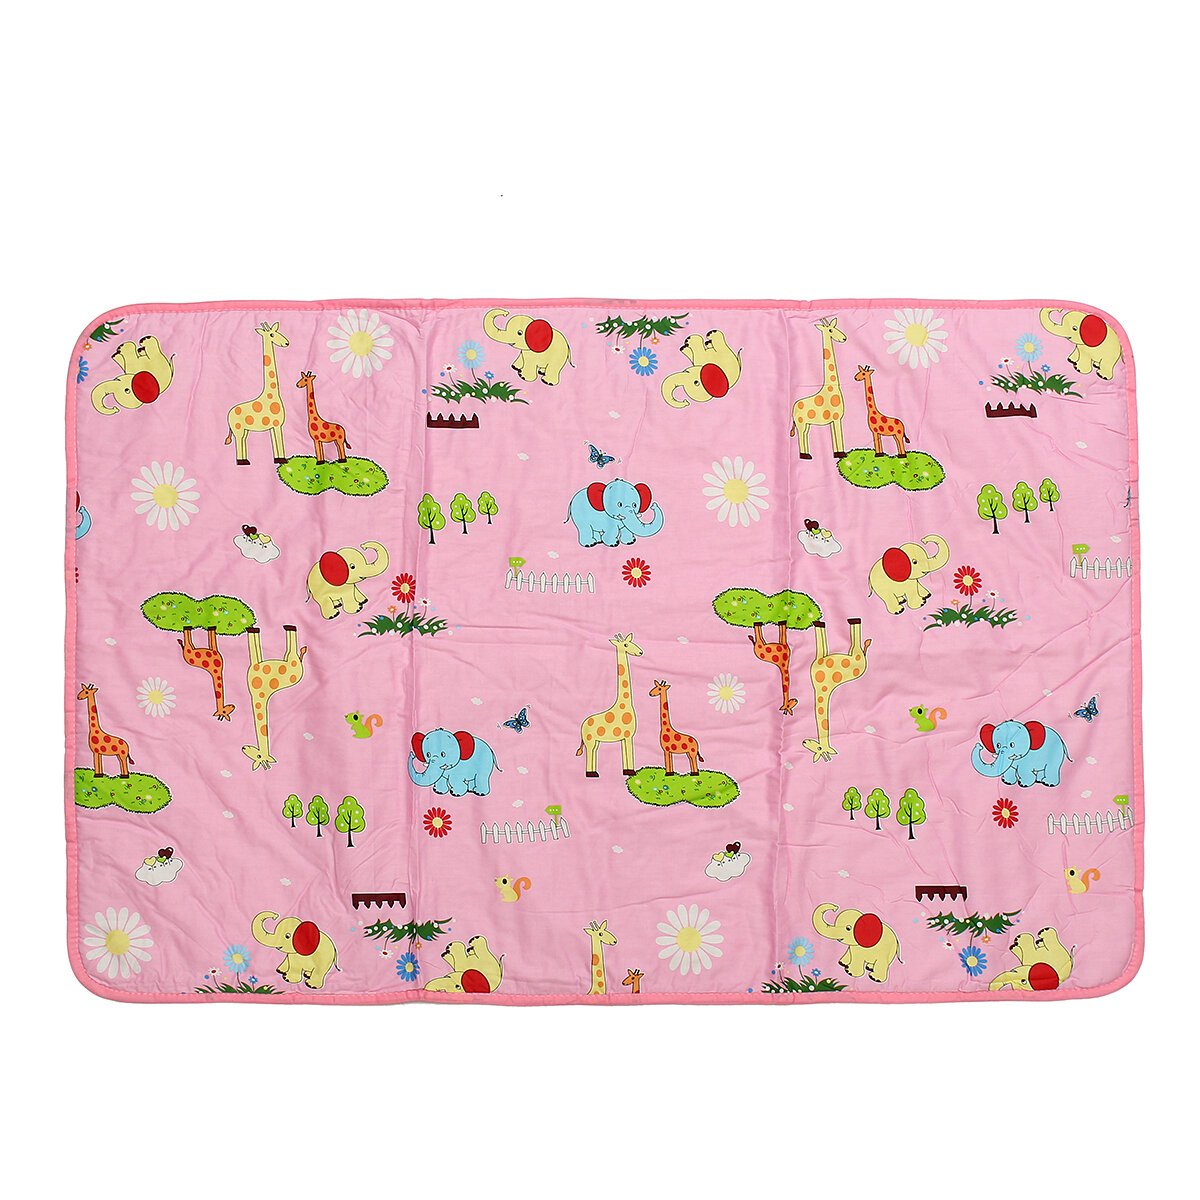 Baby Diaper Changing Pad Kid Nappy Urine Mat For Children Infant Adult 120x150cm